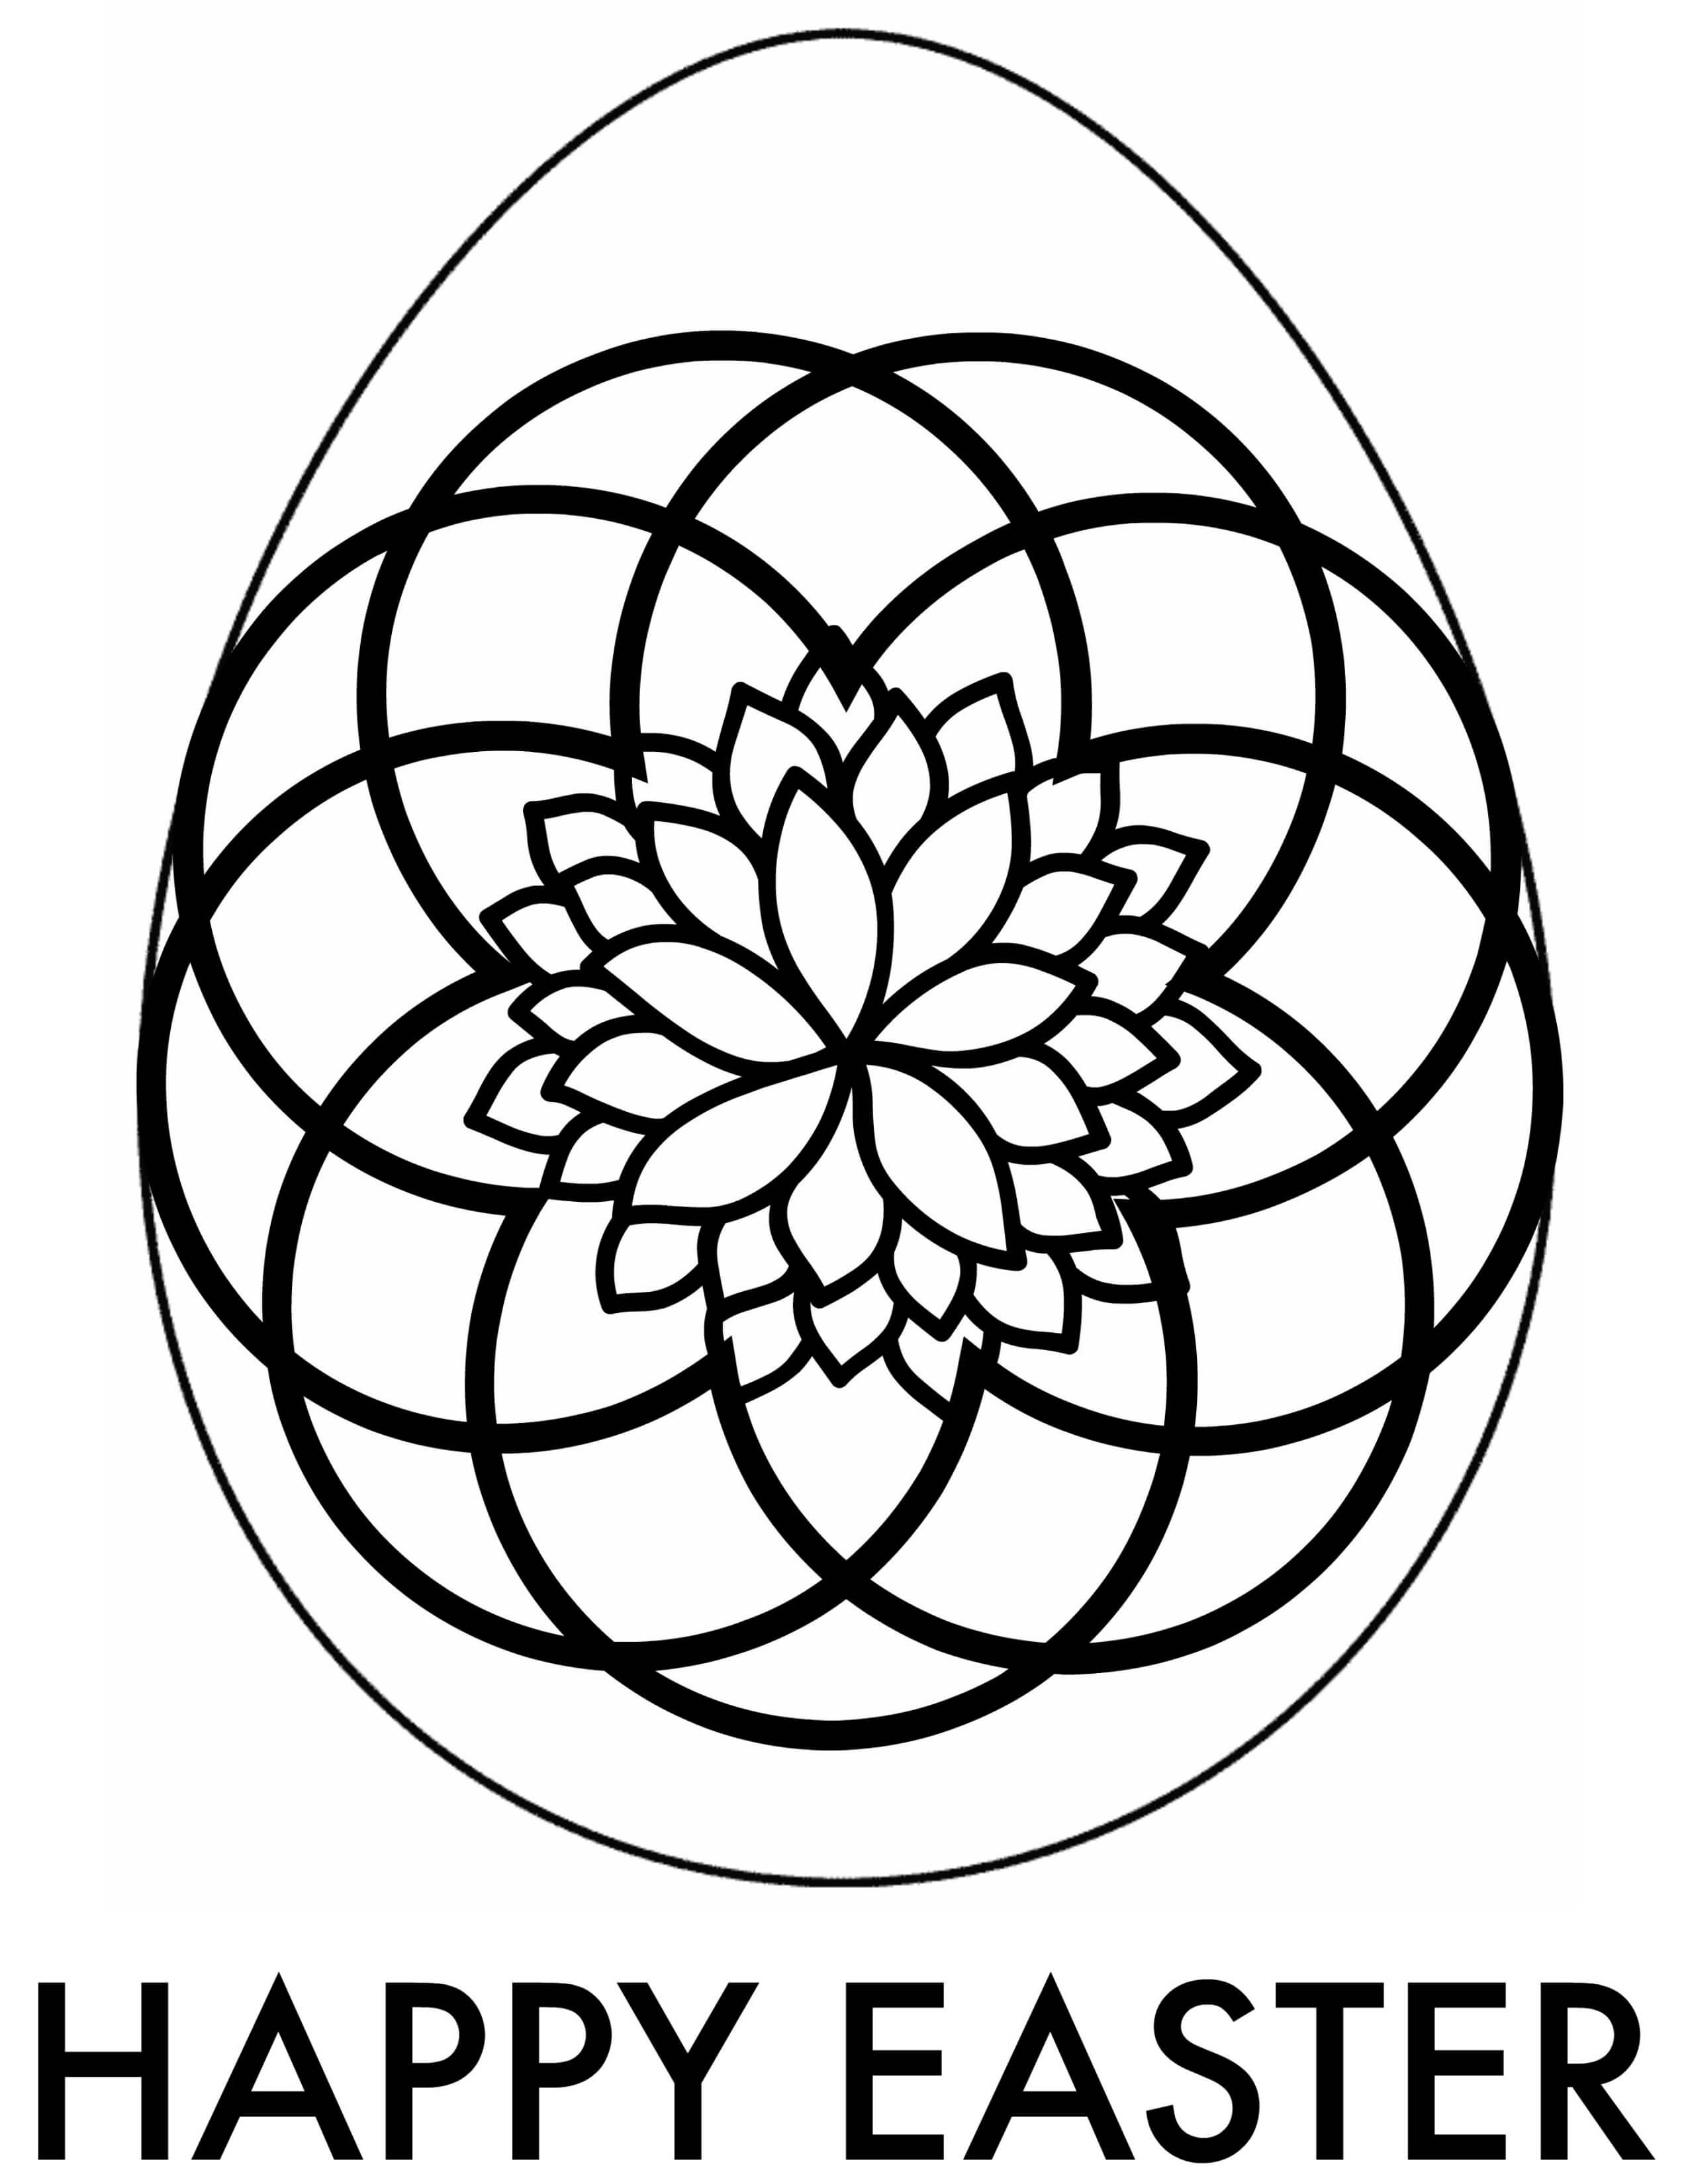 Coloring Pages For Adults Easter 23 Easter Coloring Pages For Adults Compilation Free Coloring